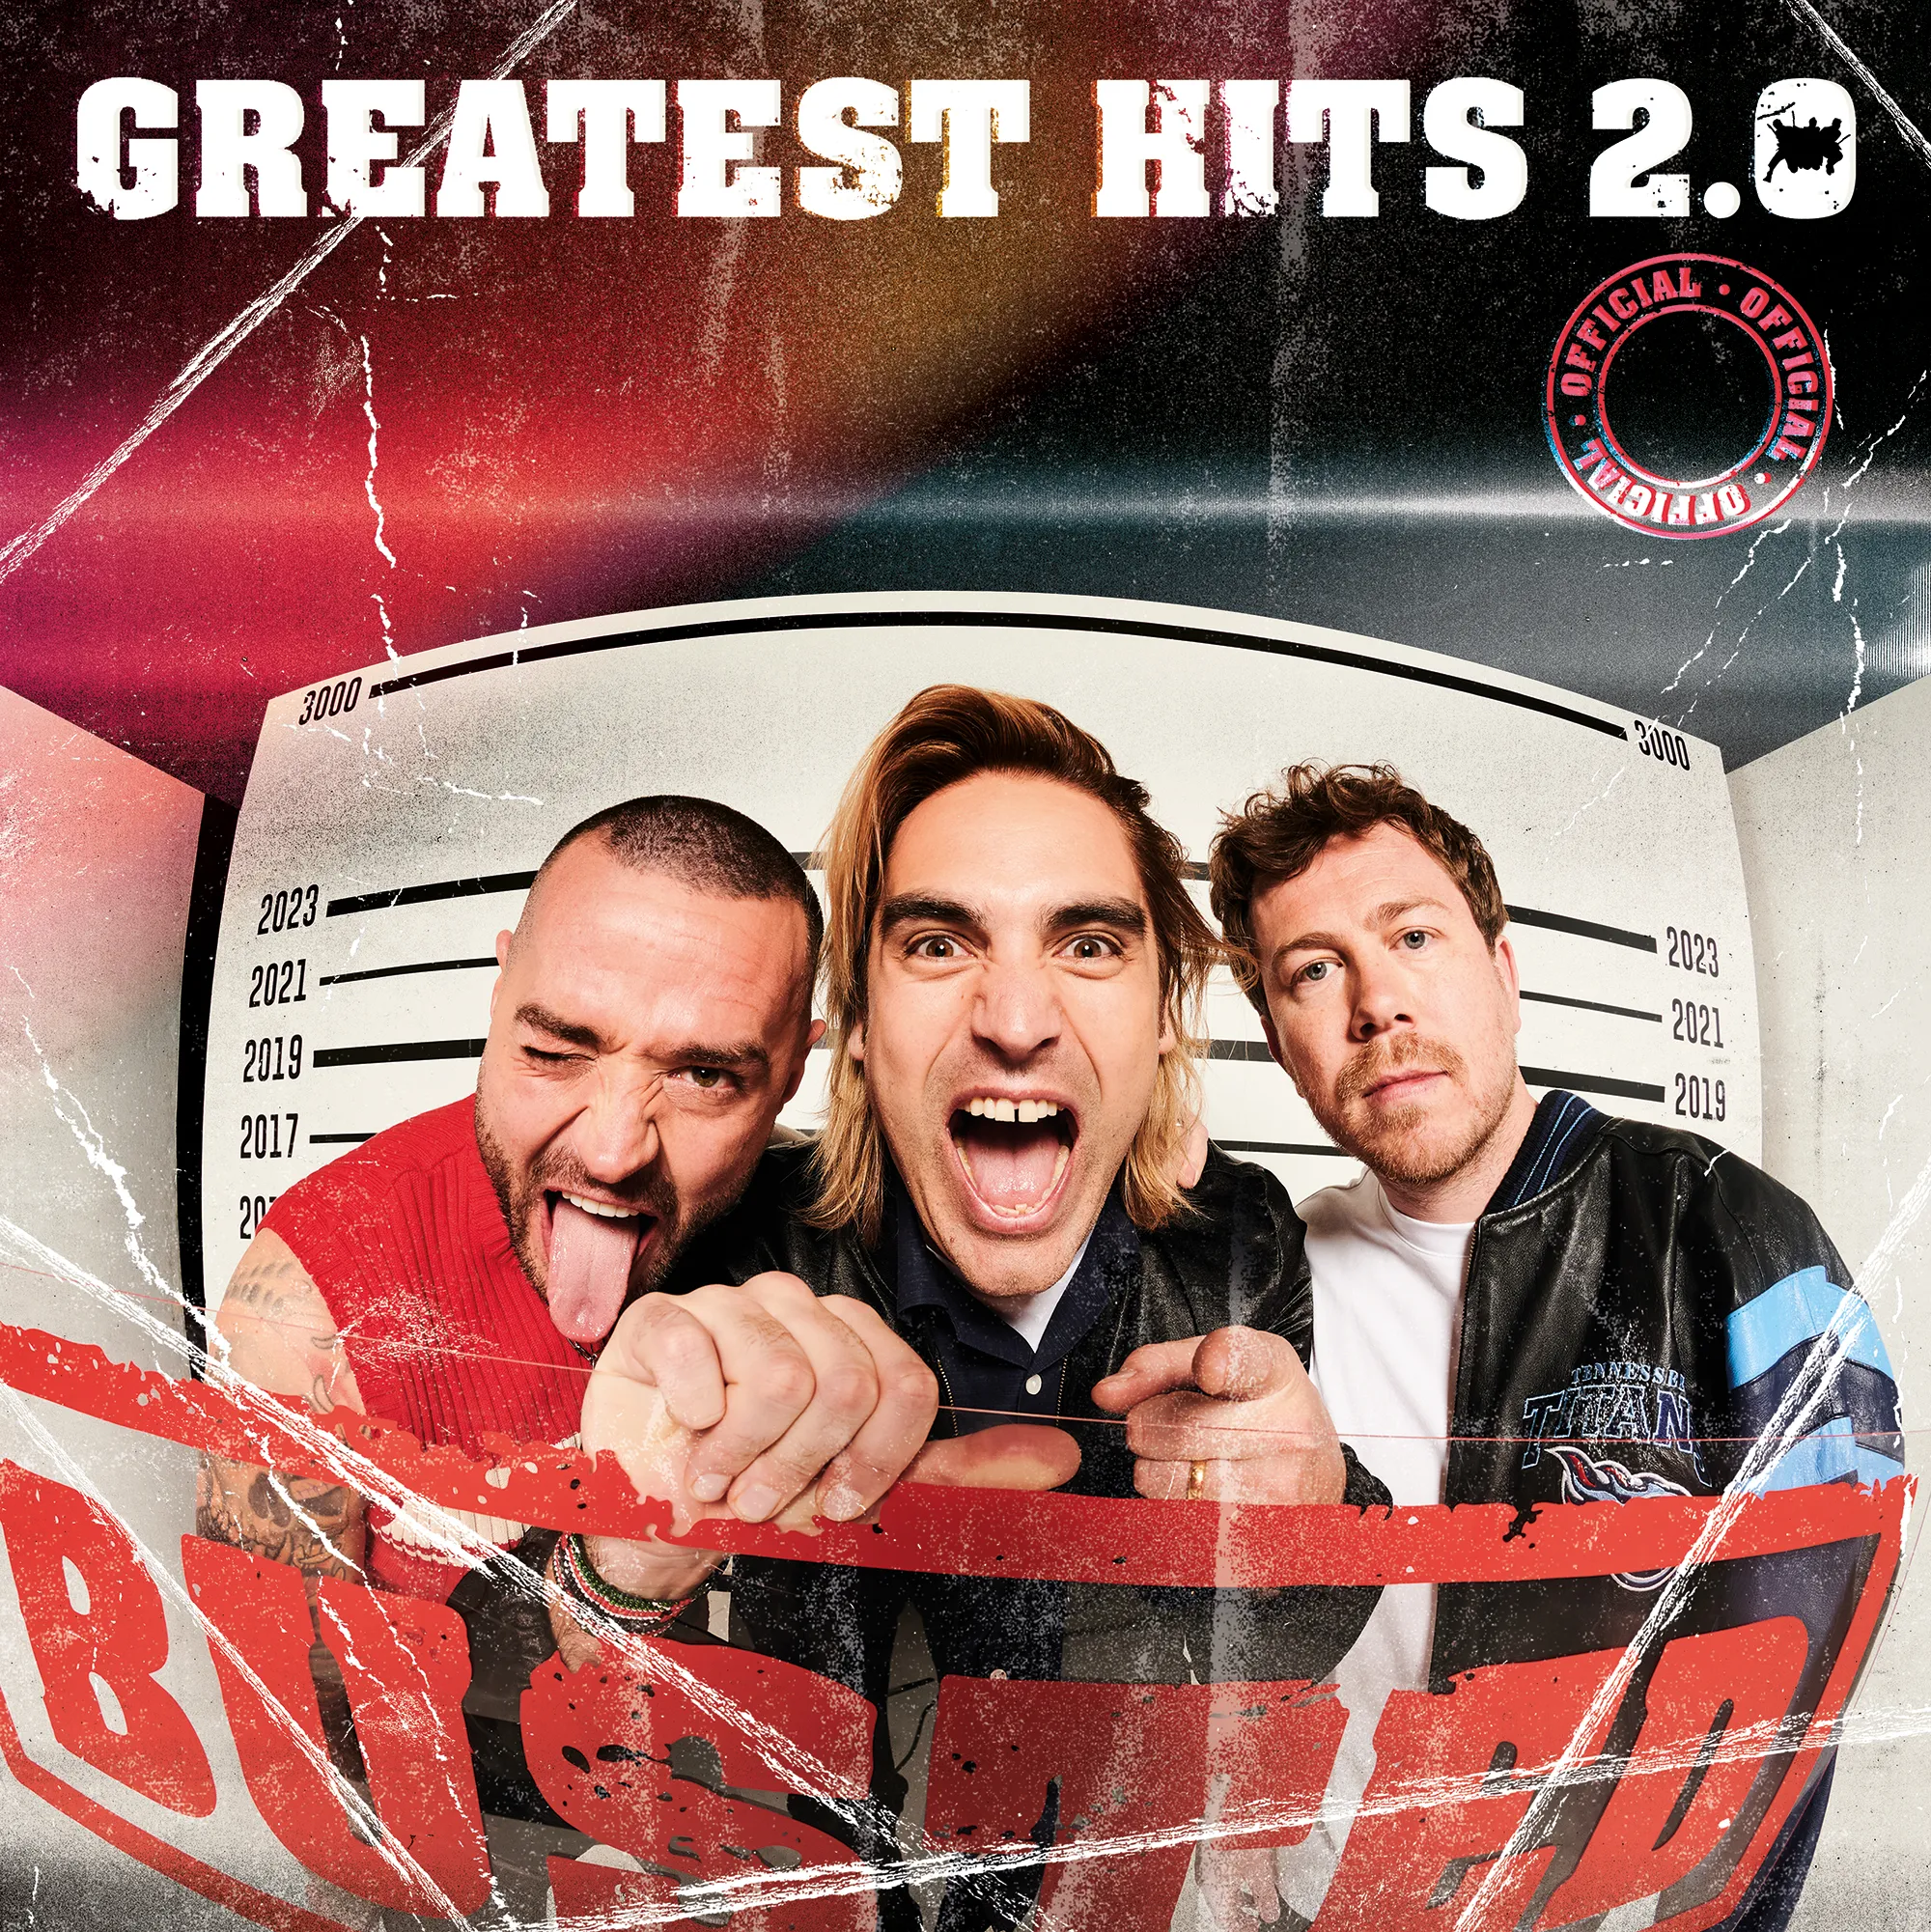 <strong>Busted - Greatest Hits 2.0</strong> (Vinyl LP - pink)